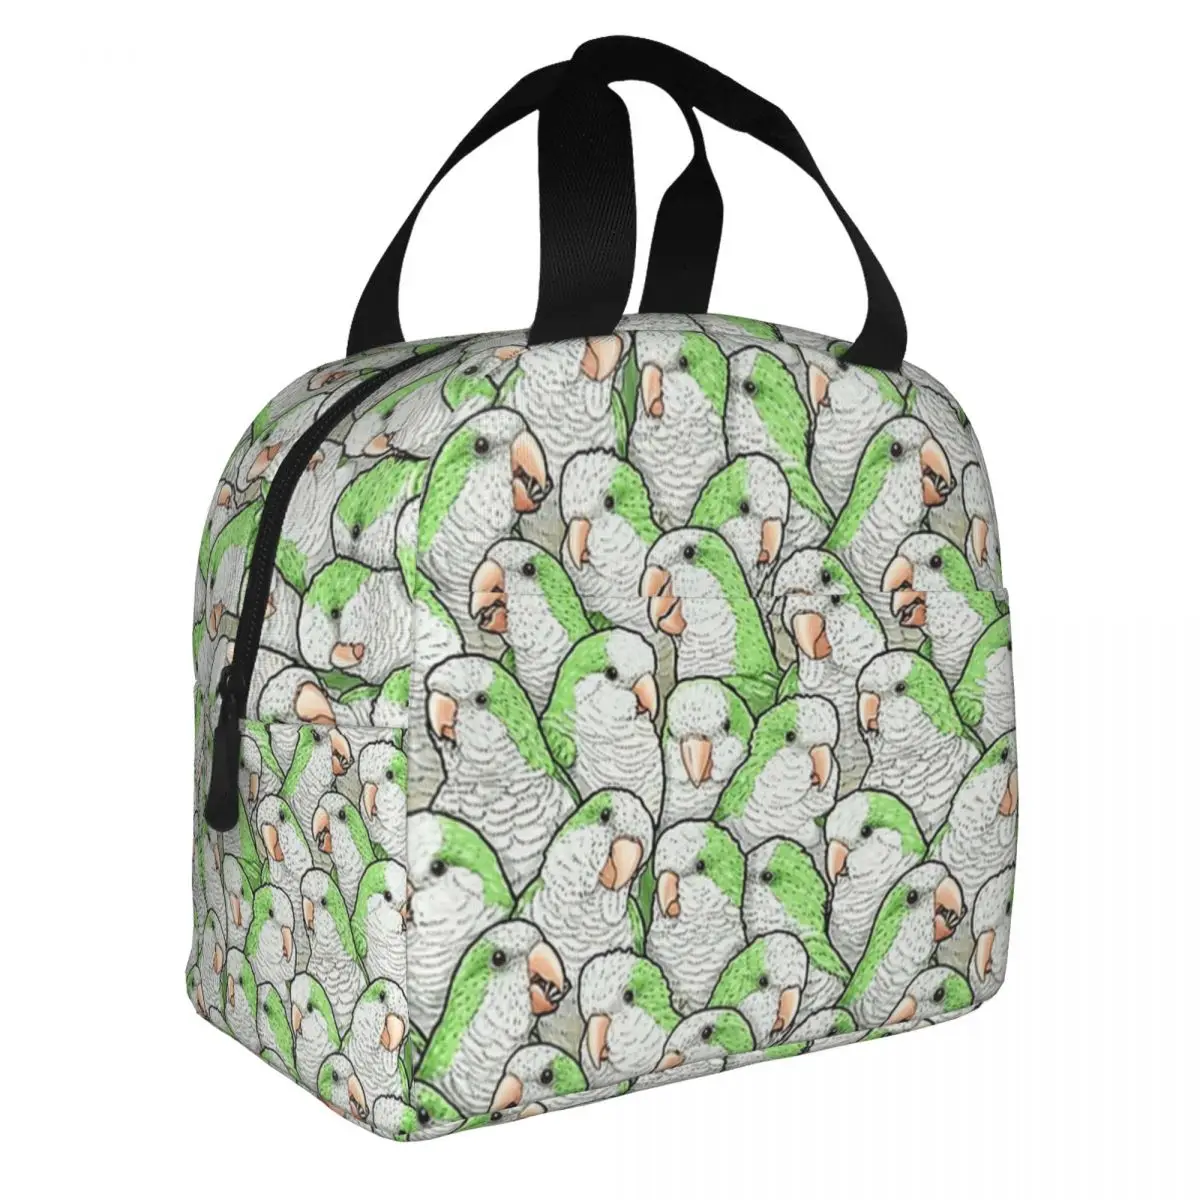 Green Quaker Parrots Lunch Bento Bags Portable Aluminum Foil thickened Thermal Cloth Lunch Bag for Women Men Boy